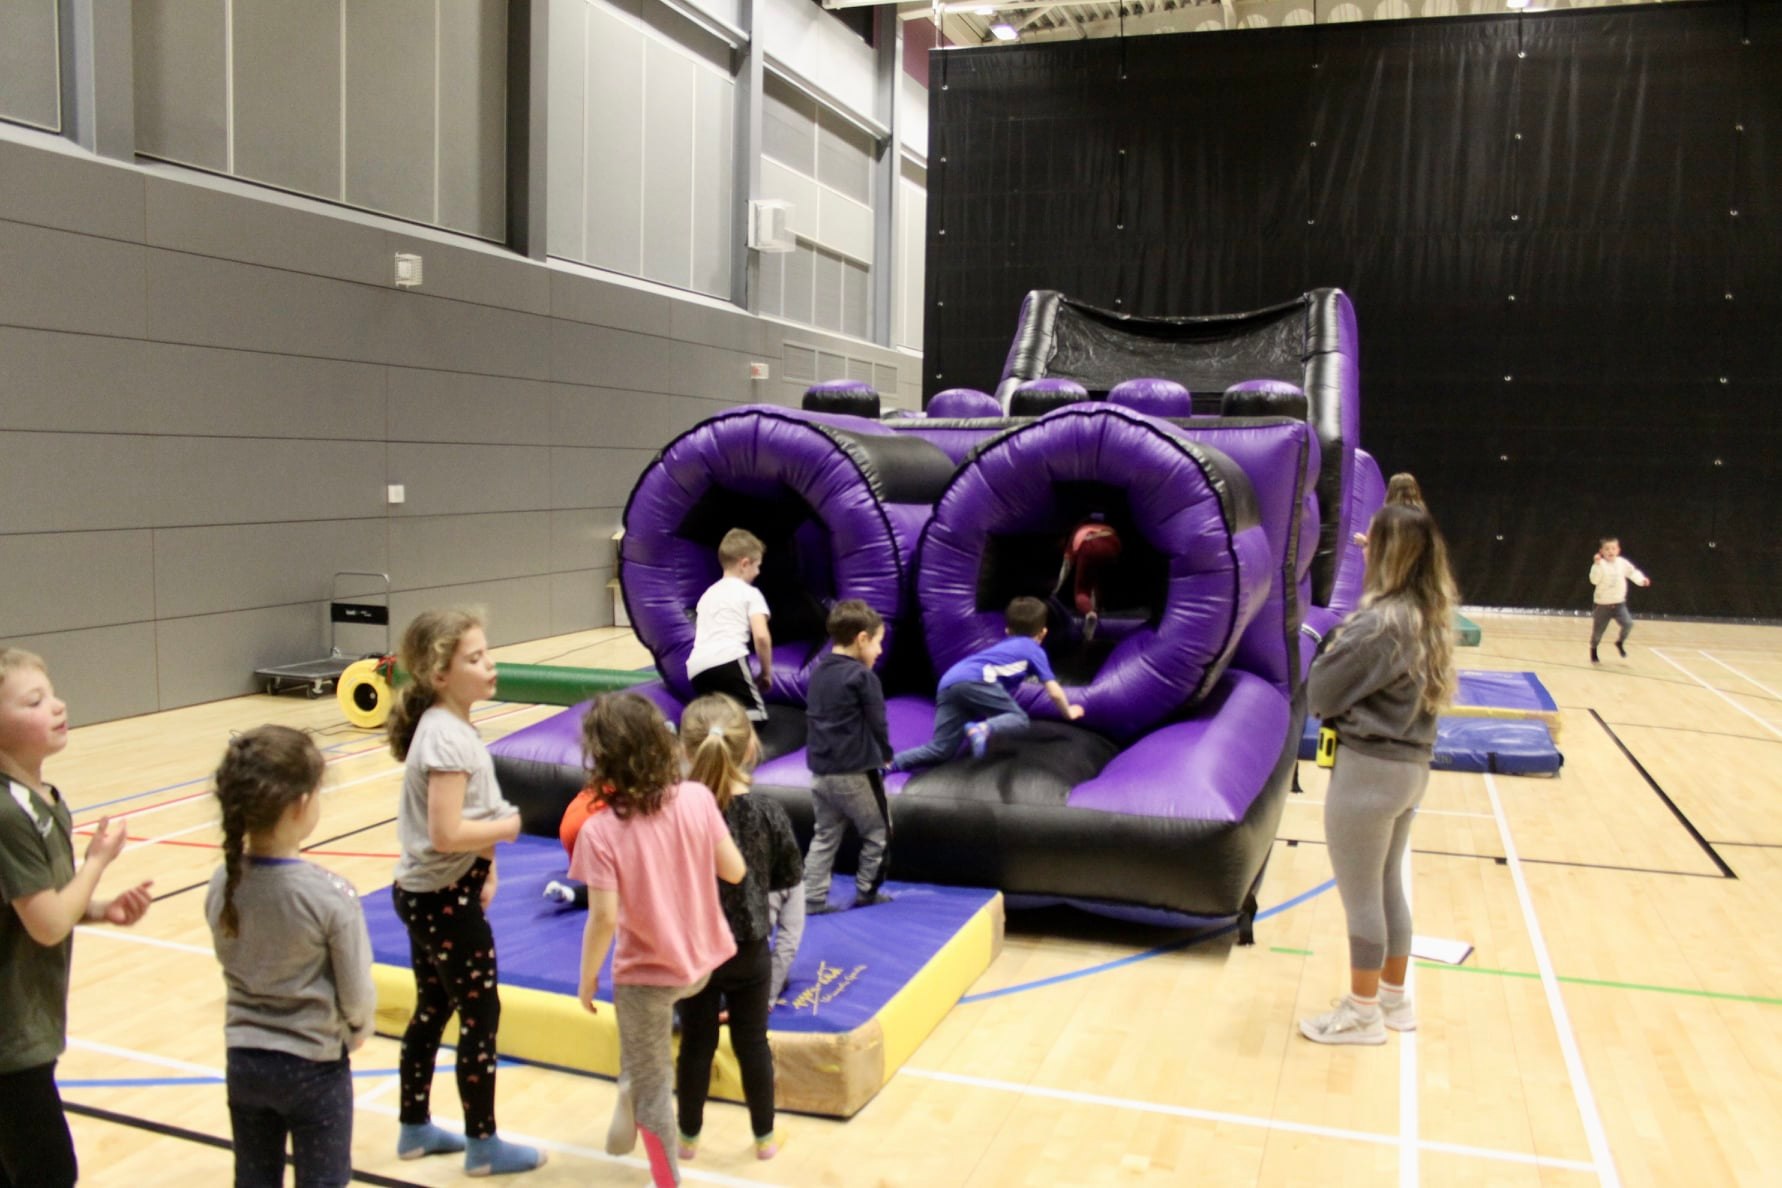 children playing on an inflatable obstacle course